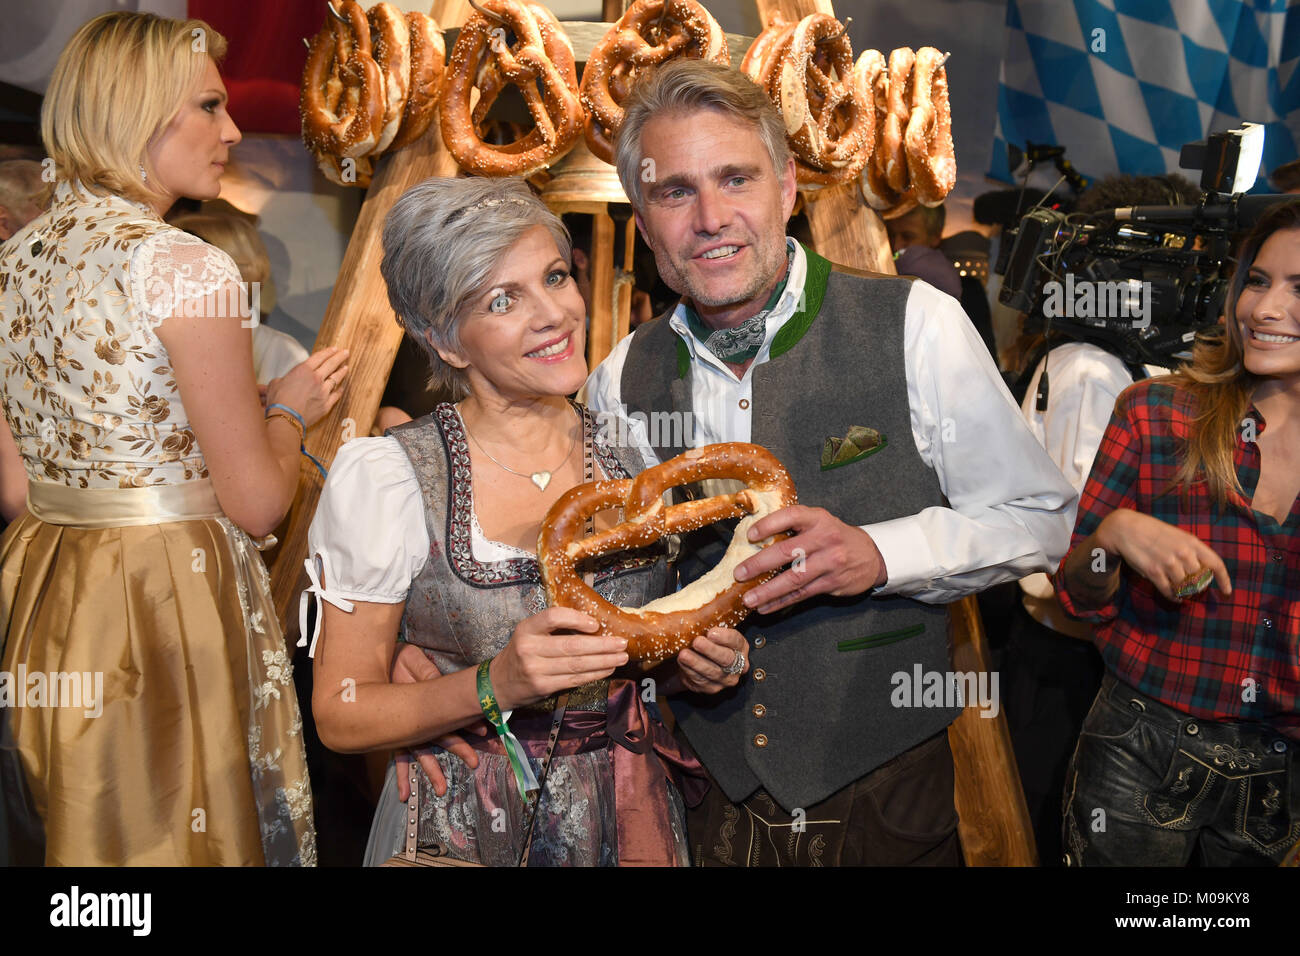 Presenter Birgit Schrowange (L) and her partner Frank Spothelfer  attend the 27th traditional 'Weisswurst party' (lit. Bavarian white sausage party) at the Stanglwirt Inn in Going, Germany, 19 January 2018. The 'Weisswurst party' is an event where stars and celebrities meet a day before the legendary Hahnenkamm downhill race. Photo: Felix Hörhager/dpa Stock Photo